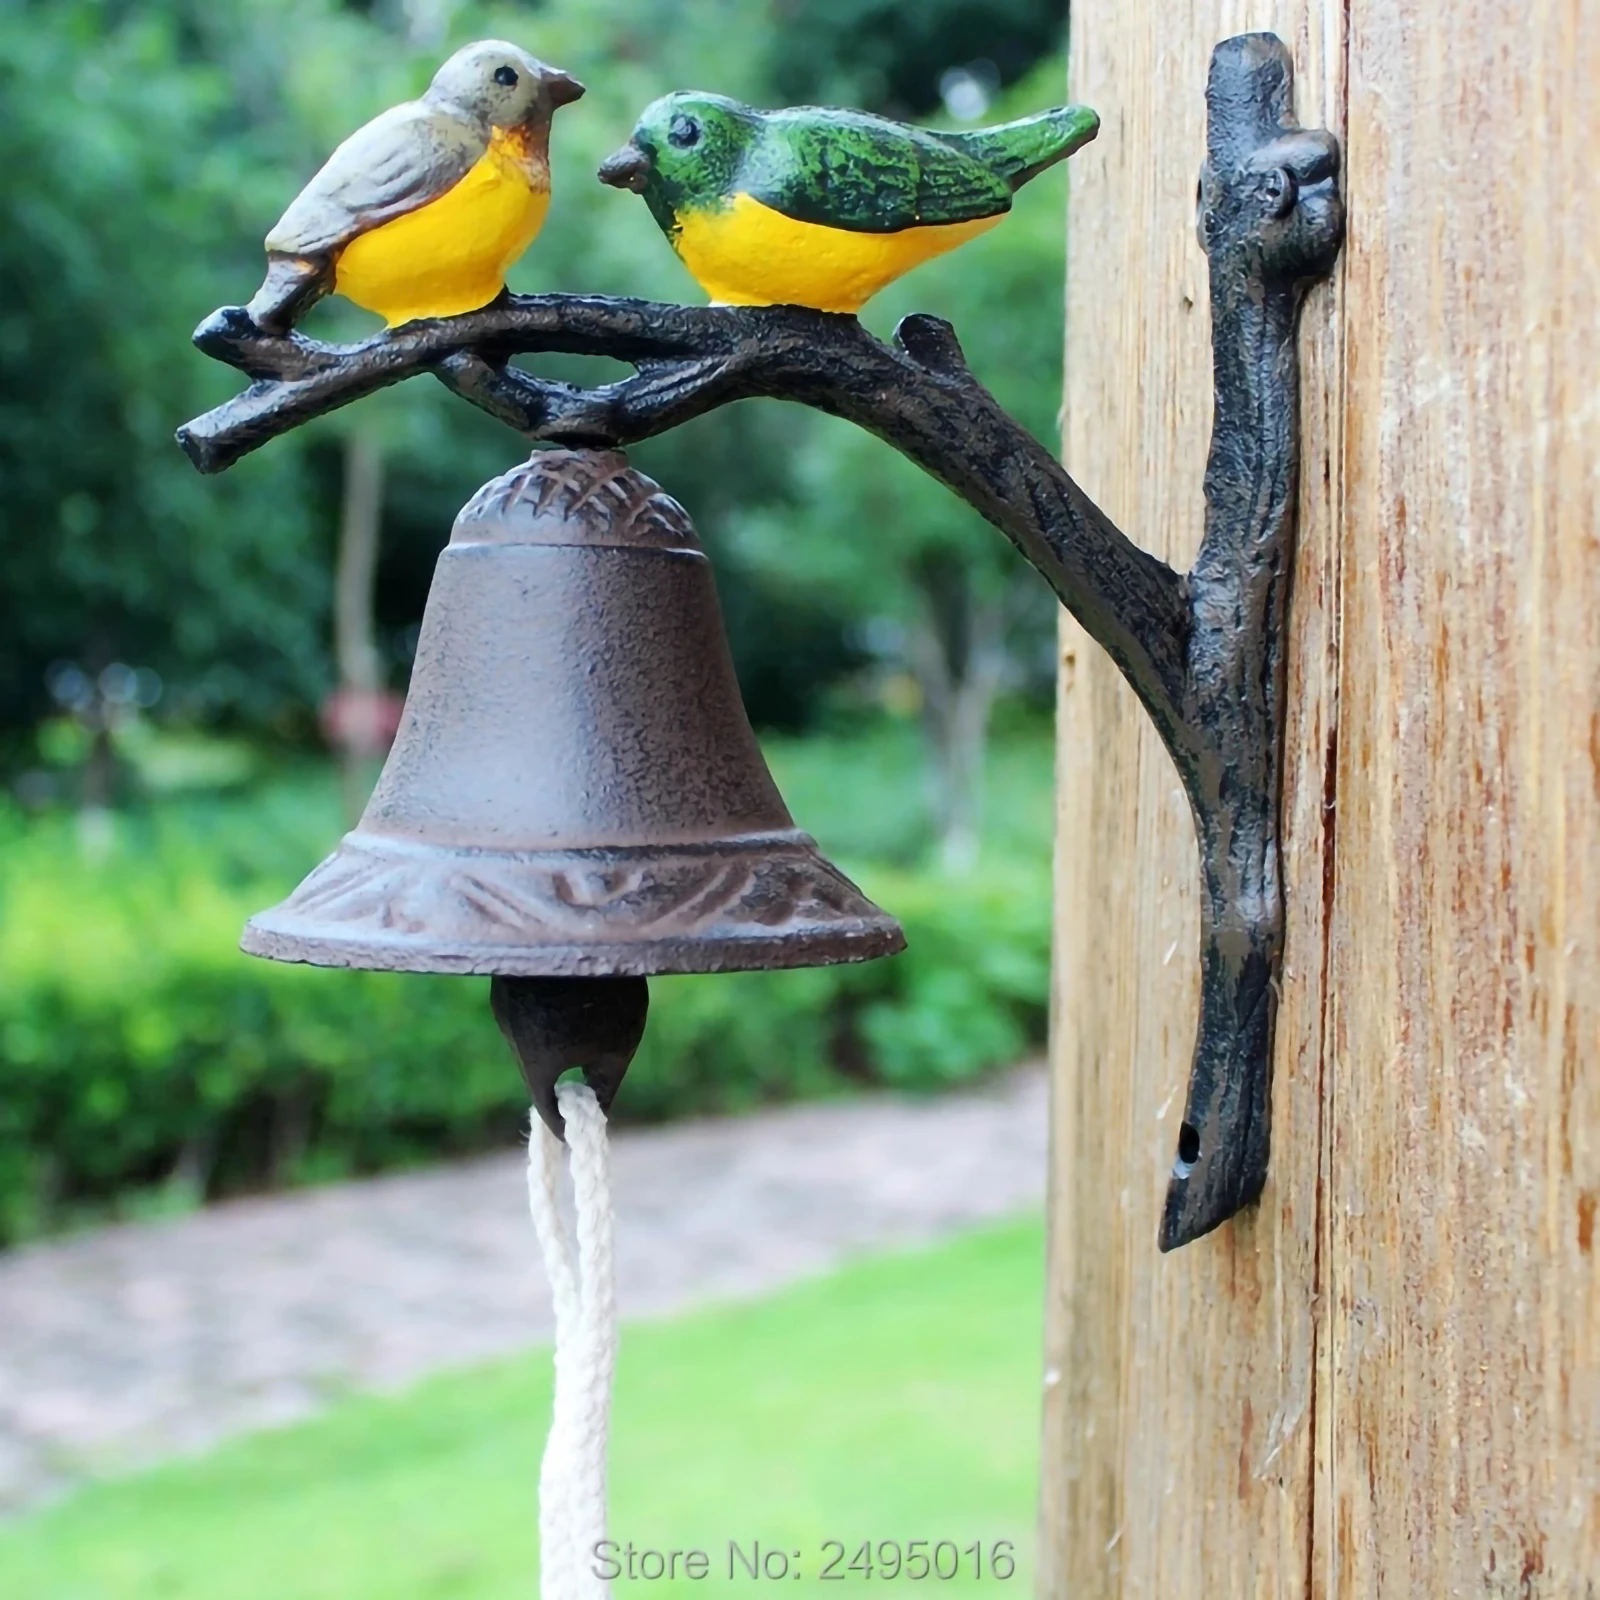 

Two Little Birds Modelling Doorbell Steel Hanging Bells Wrought Iron Dinner bell Retro colourful handmade craft for Yard Country